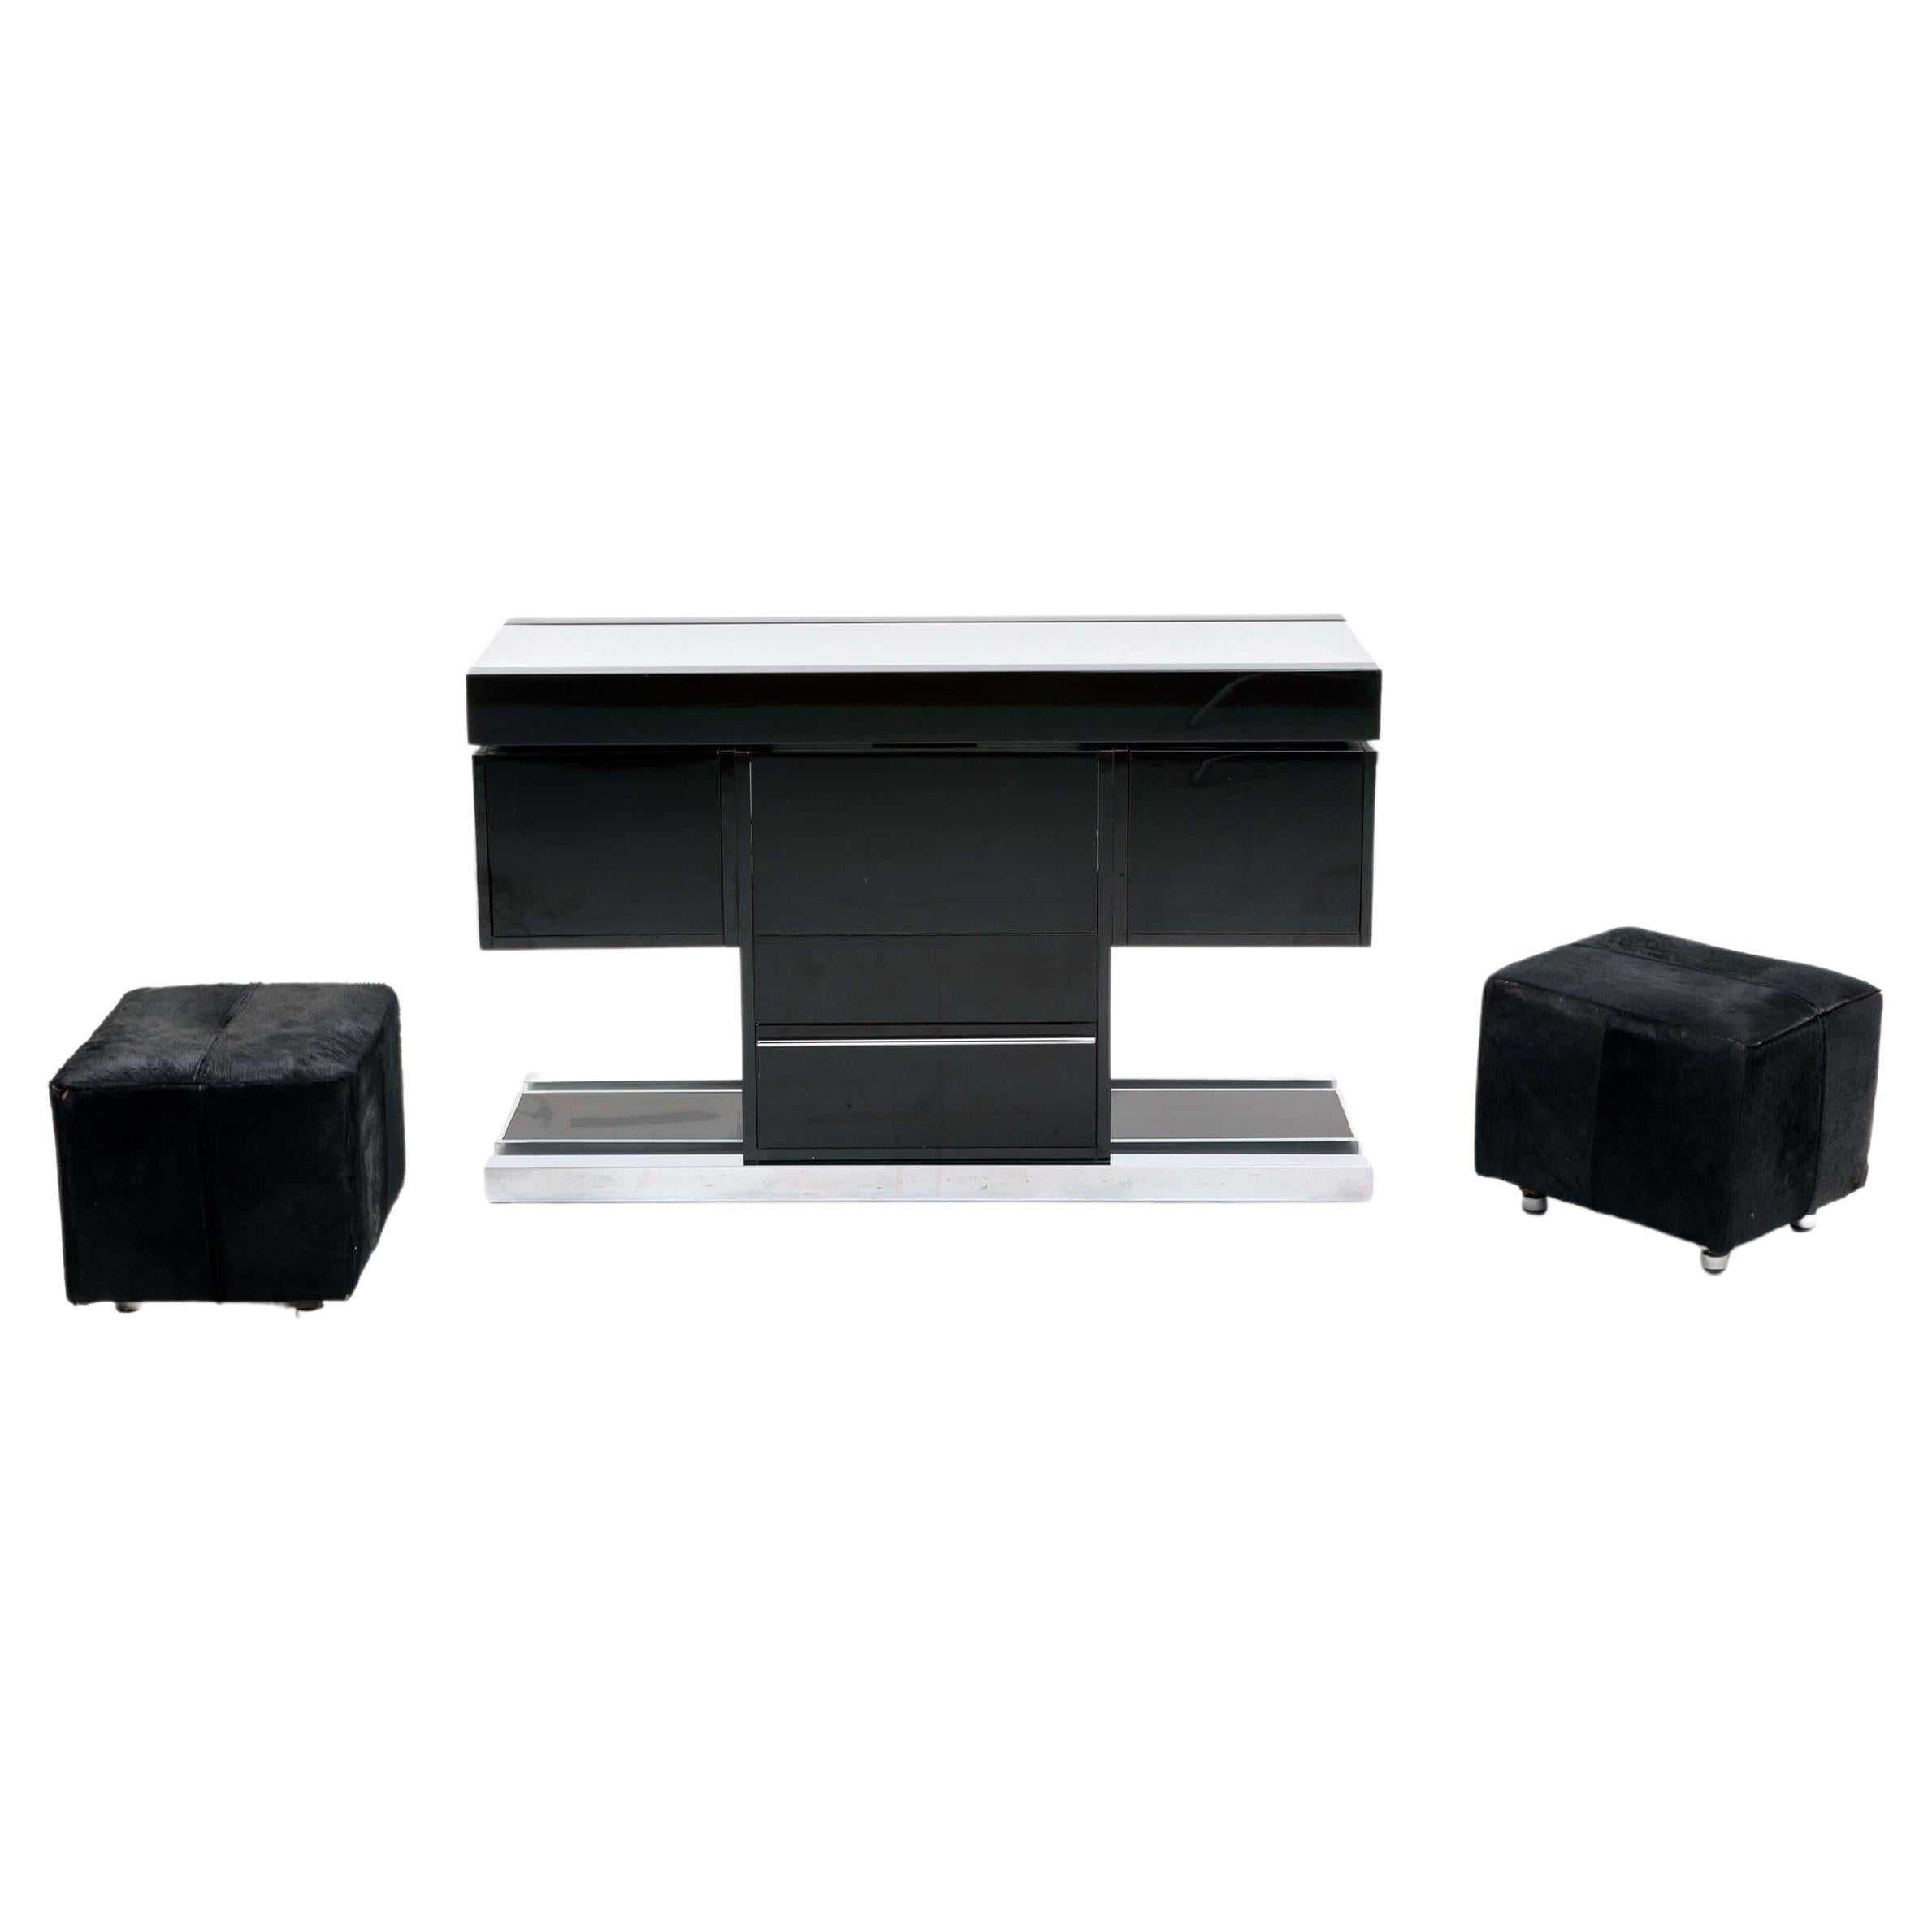 Black Lacquer Dry Bar Set, Chrome Detailing, Cow Hide Upholstery, circa 1970 For Sale